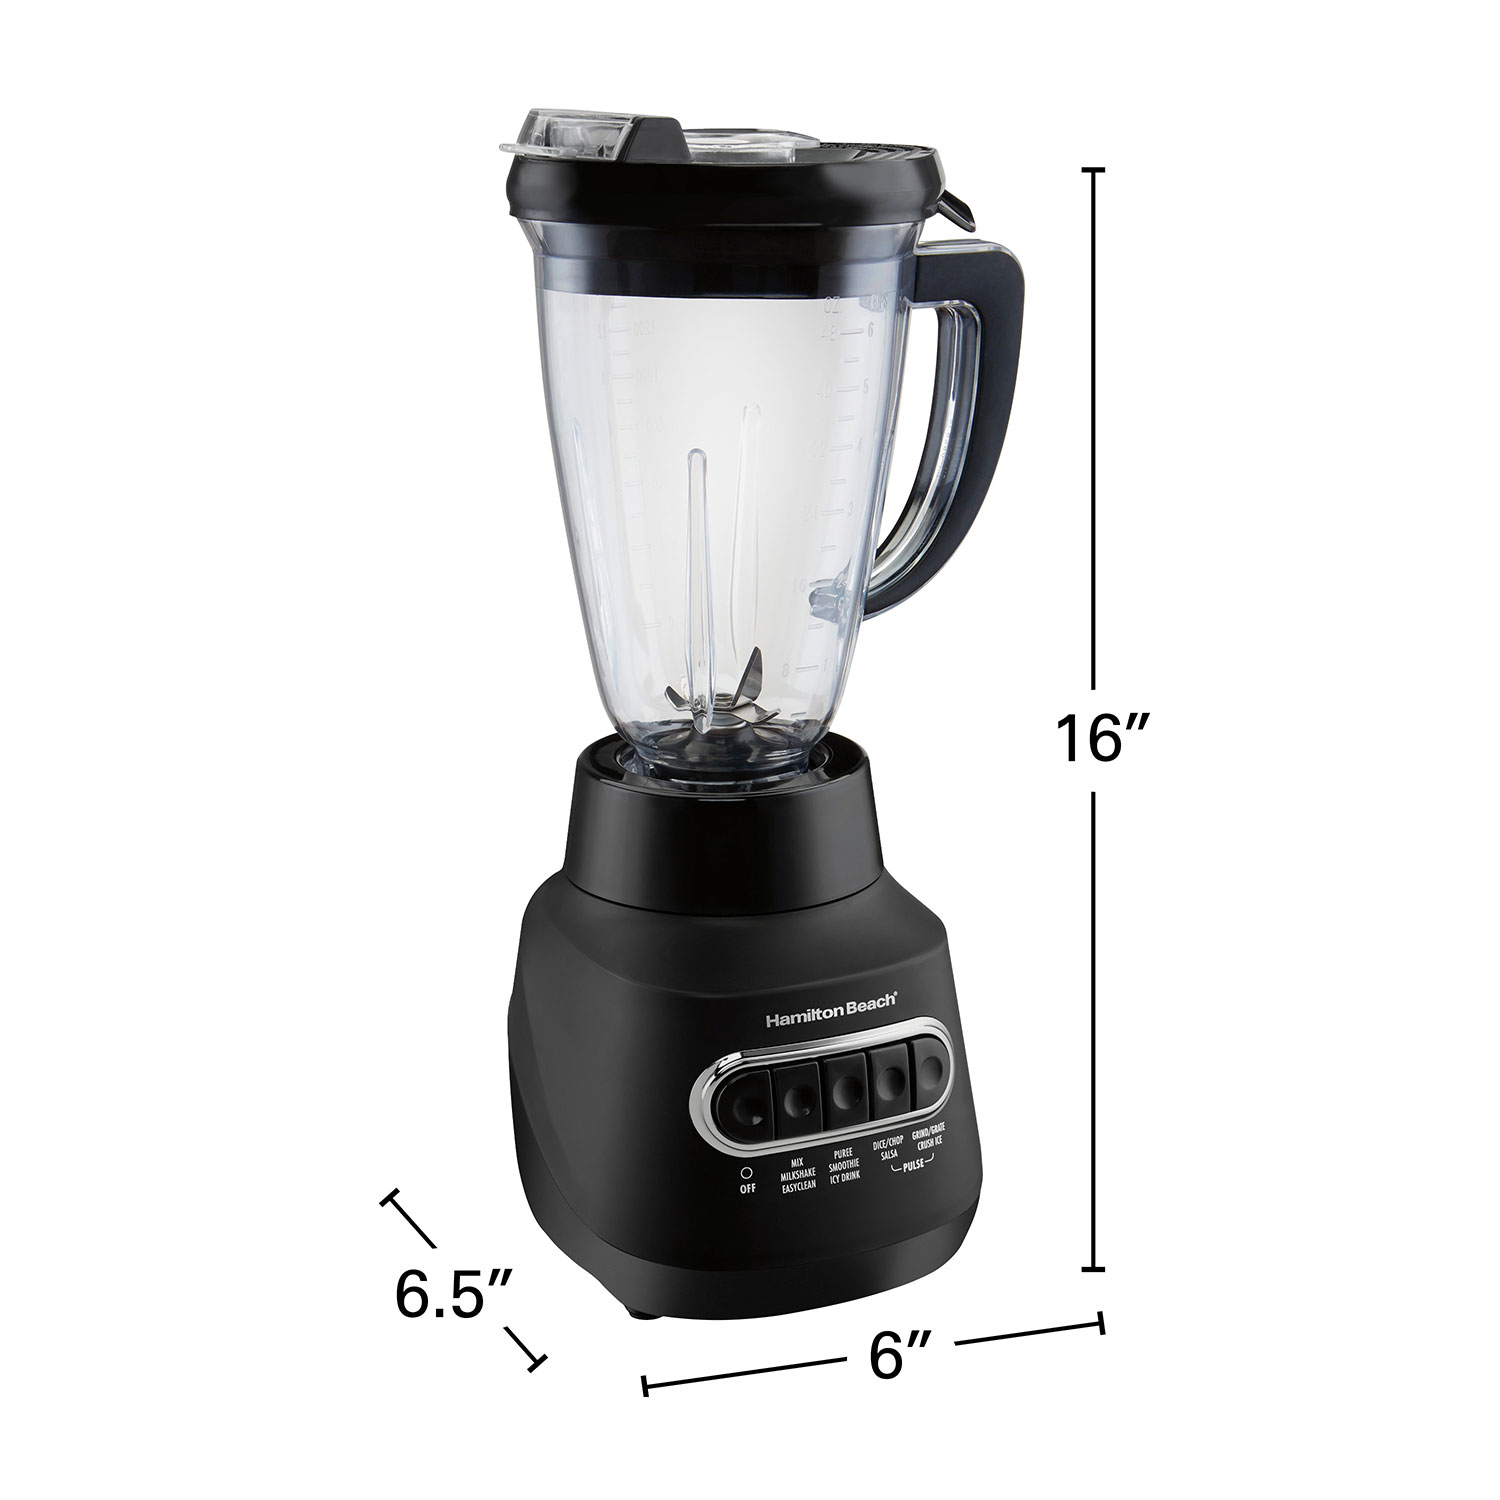 Hamilton Beach Wave Action Blender for Shakes and Smoothies, 48 oz.  capacity, Glass Jar, Black, 53521 